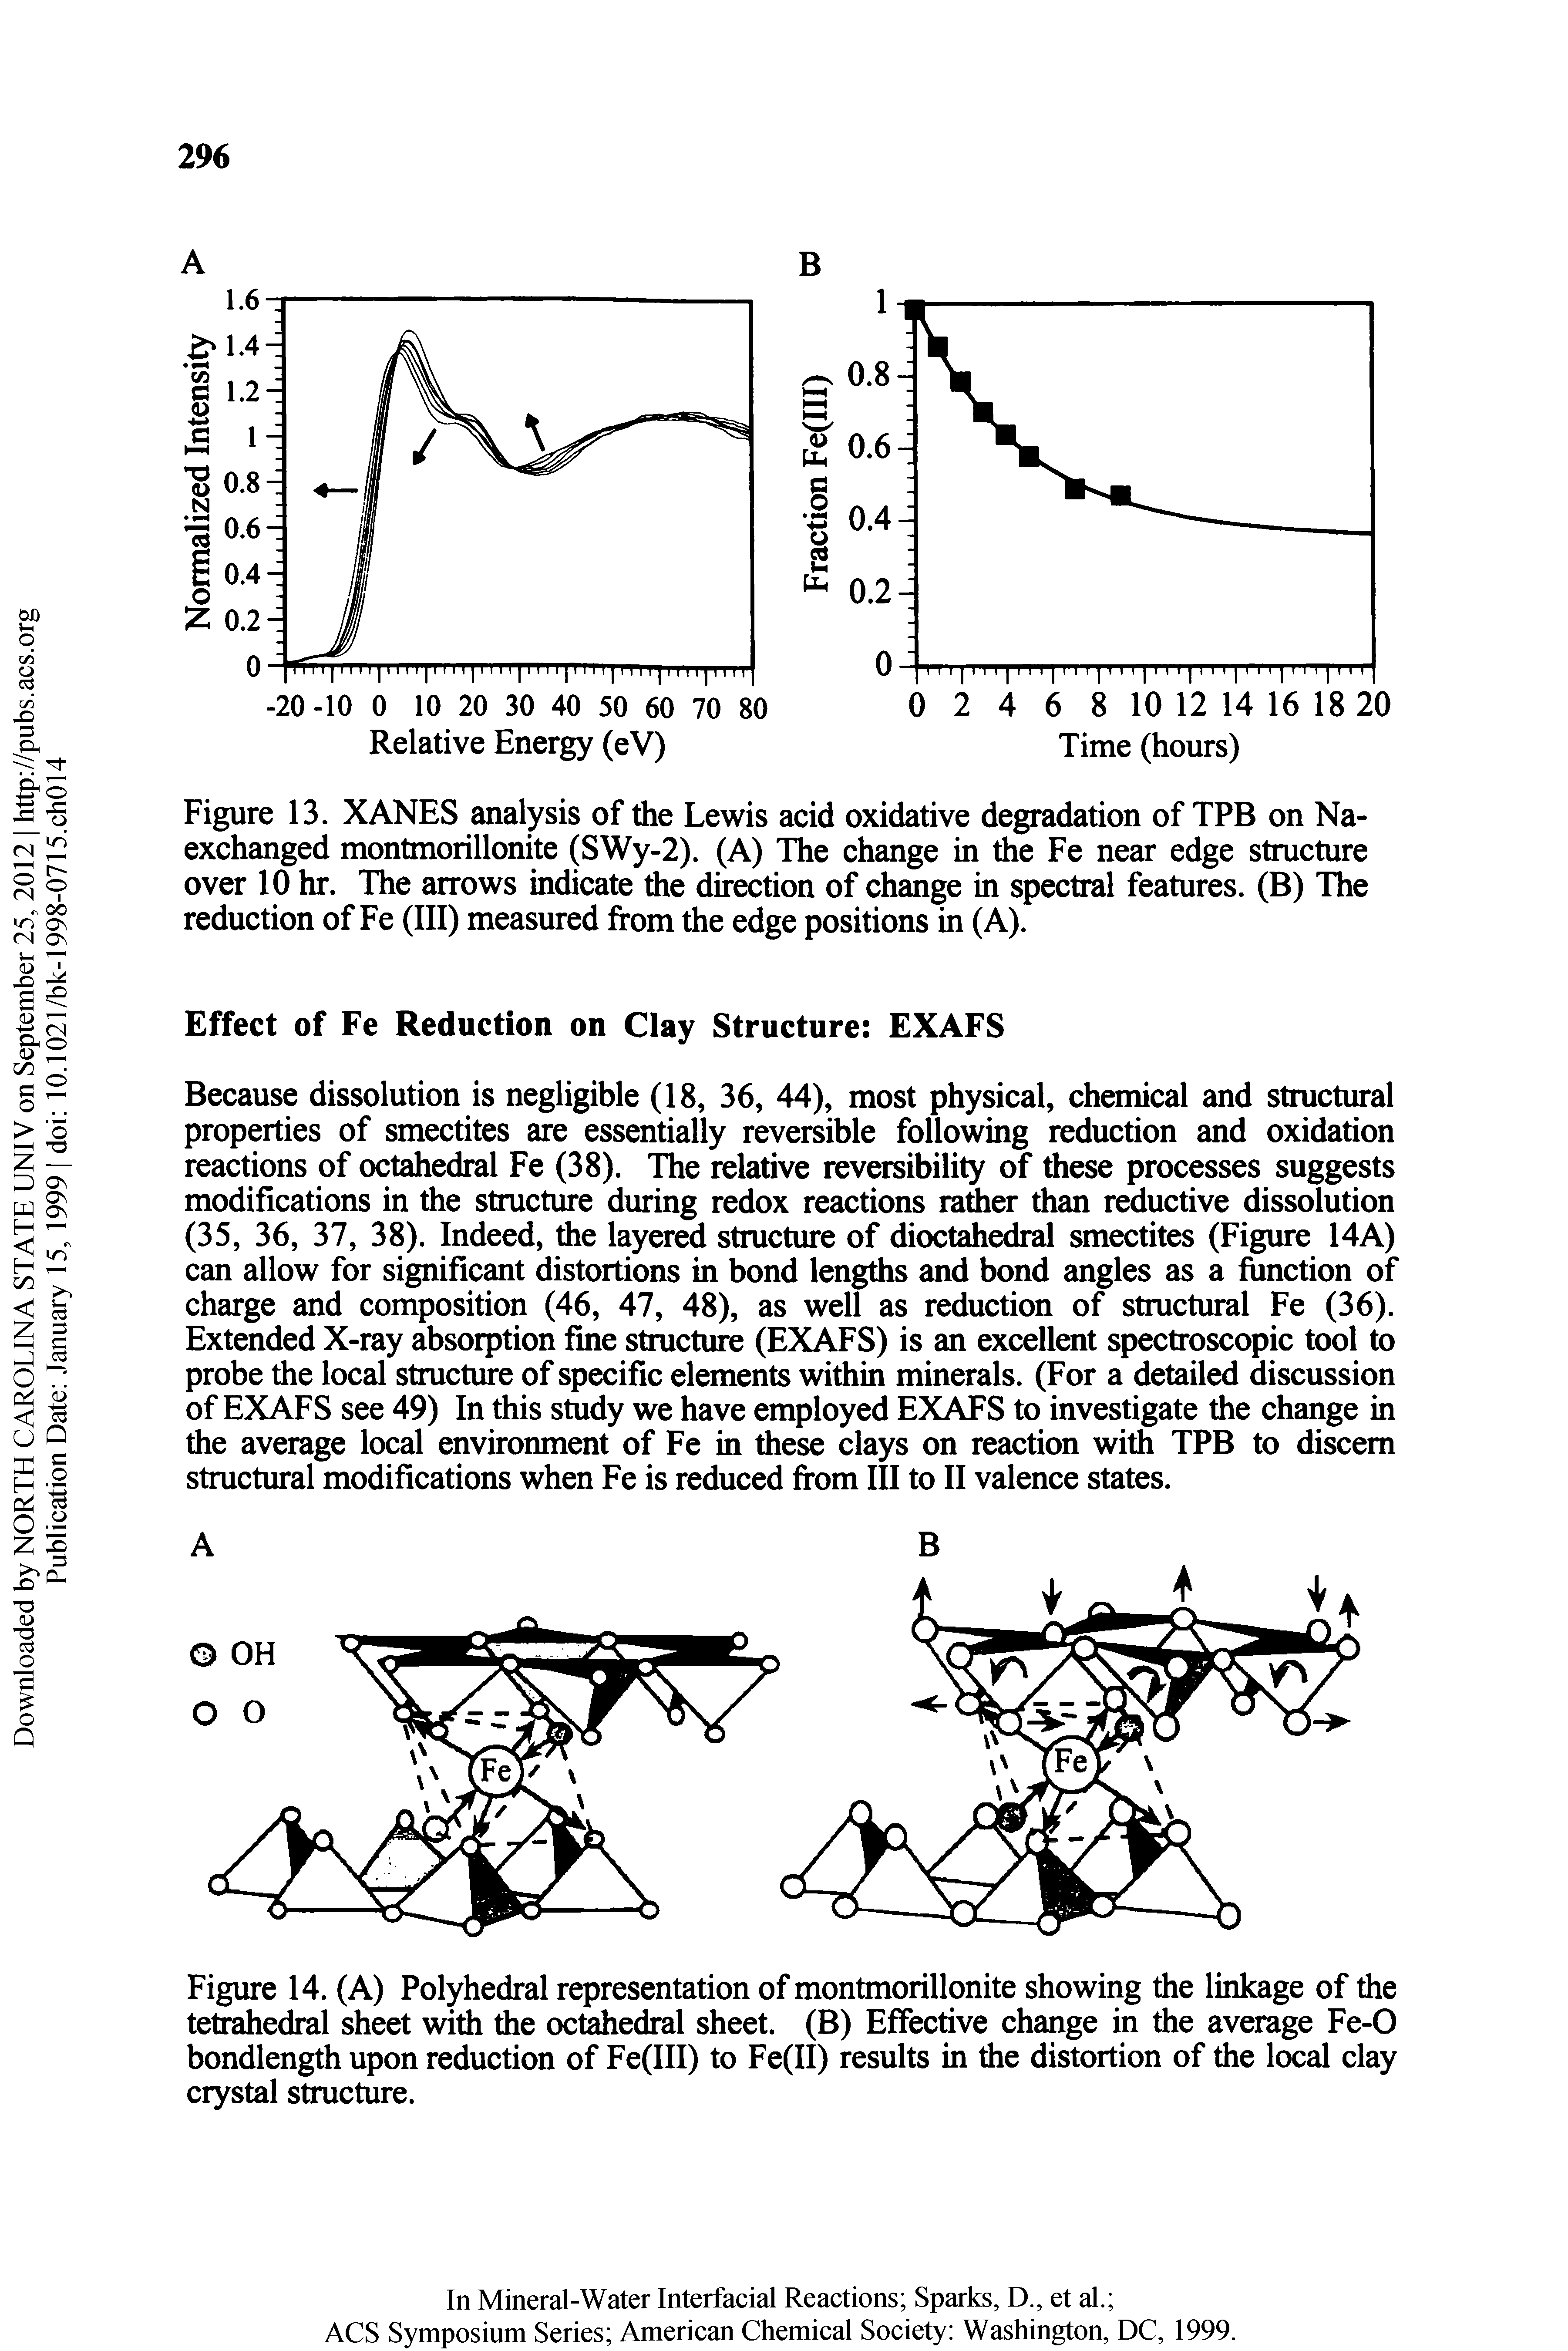 Figure 14. (A) Polyhedral representation of montmorillonite showing the linkage of the tetrahedral sheet with the octahedral sheet. (B) Effective change in the average Fe-0 bondlength upon reduction of Fe(III) to Fe(II) results in the distortion of the local clay crystal structure.